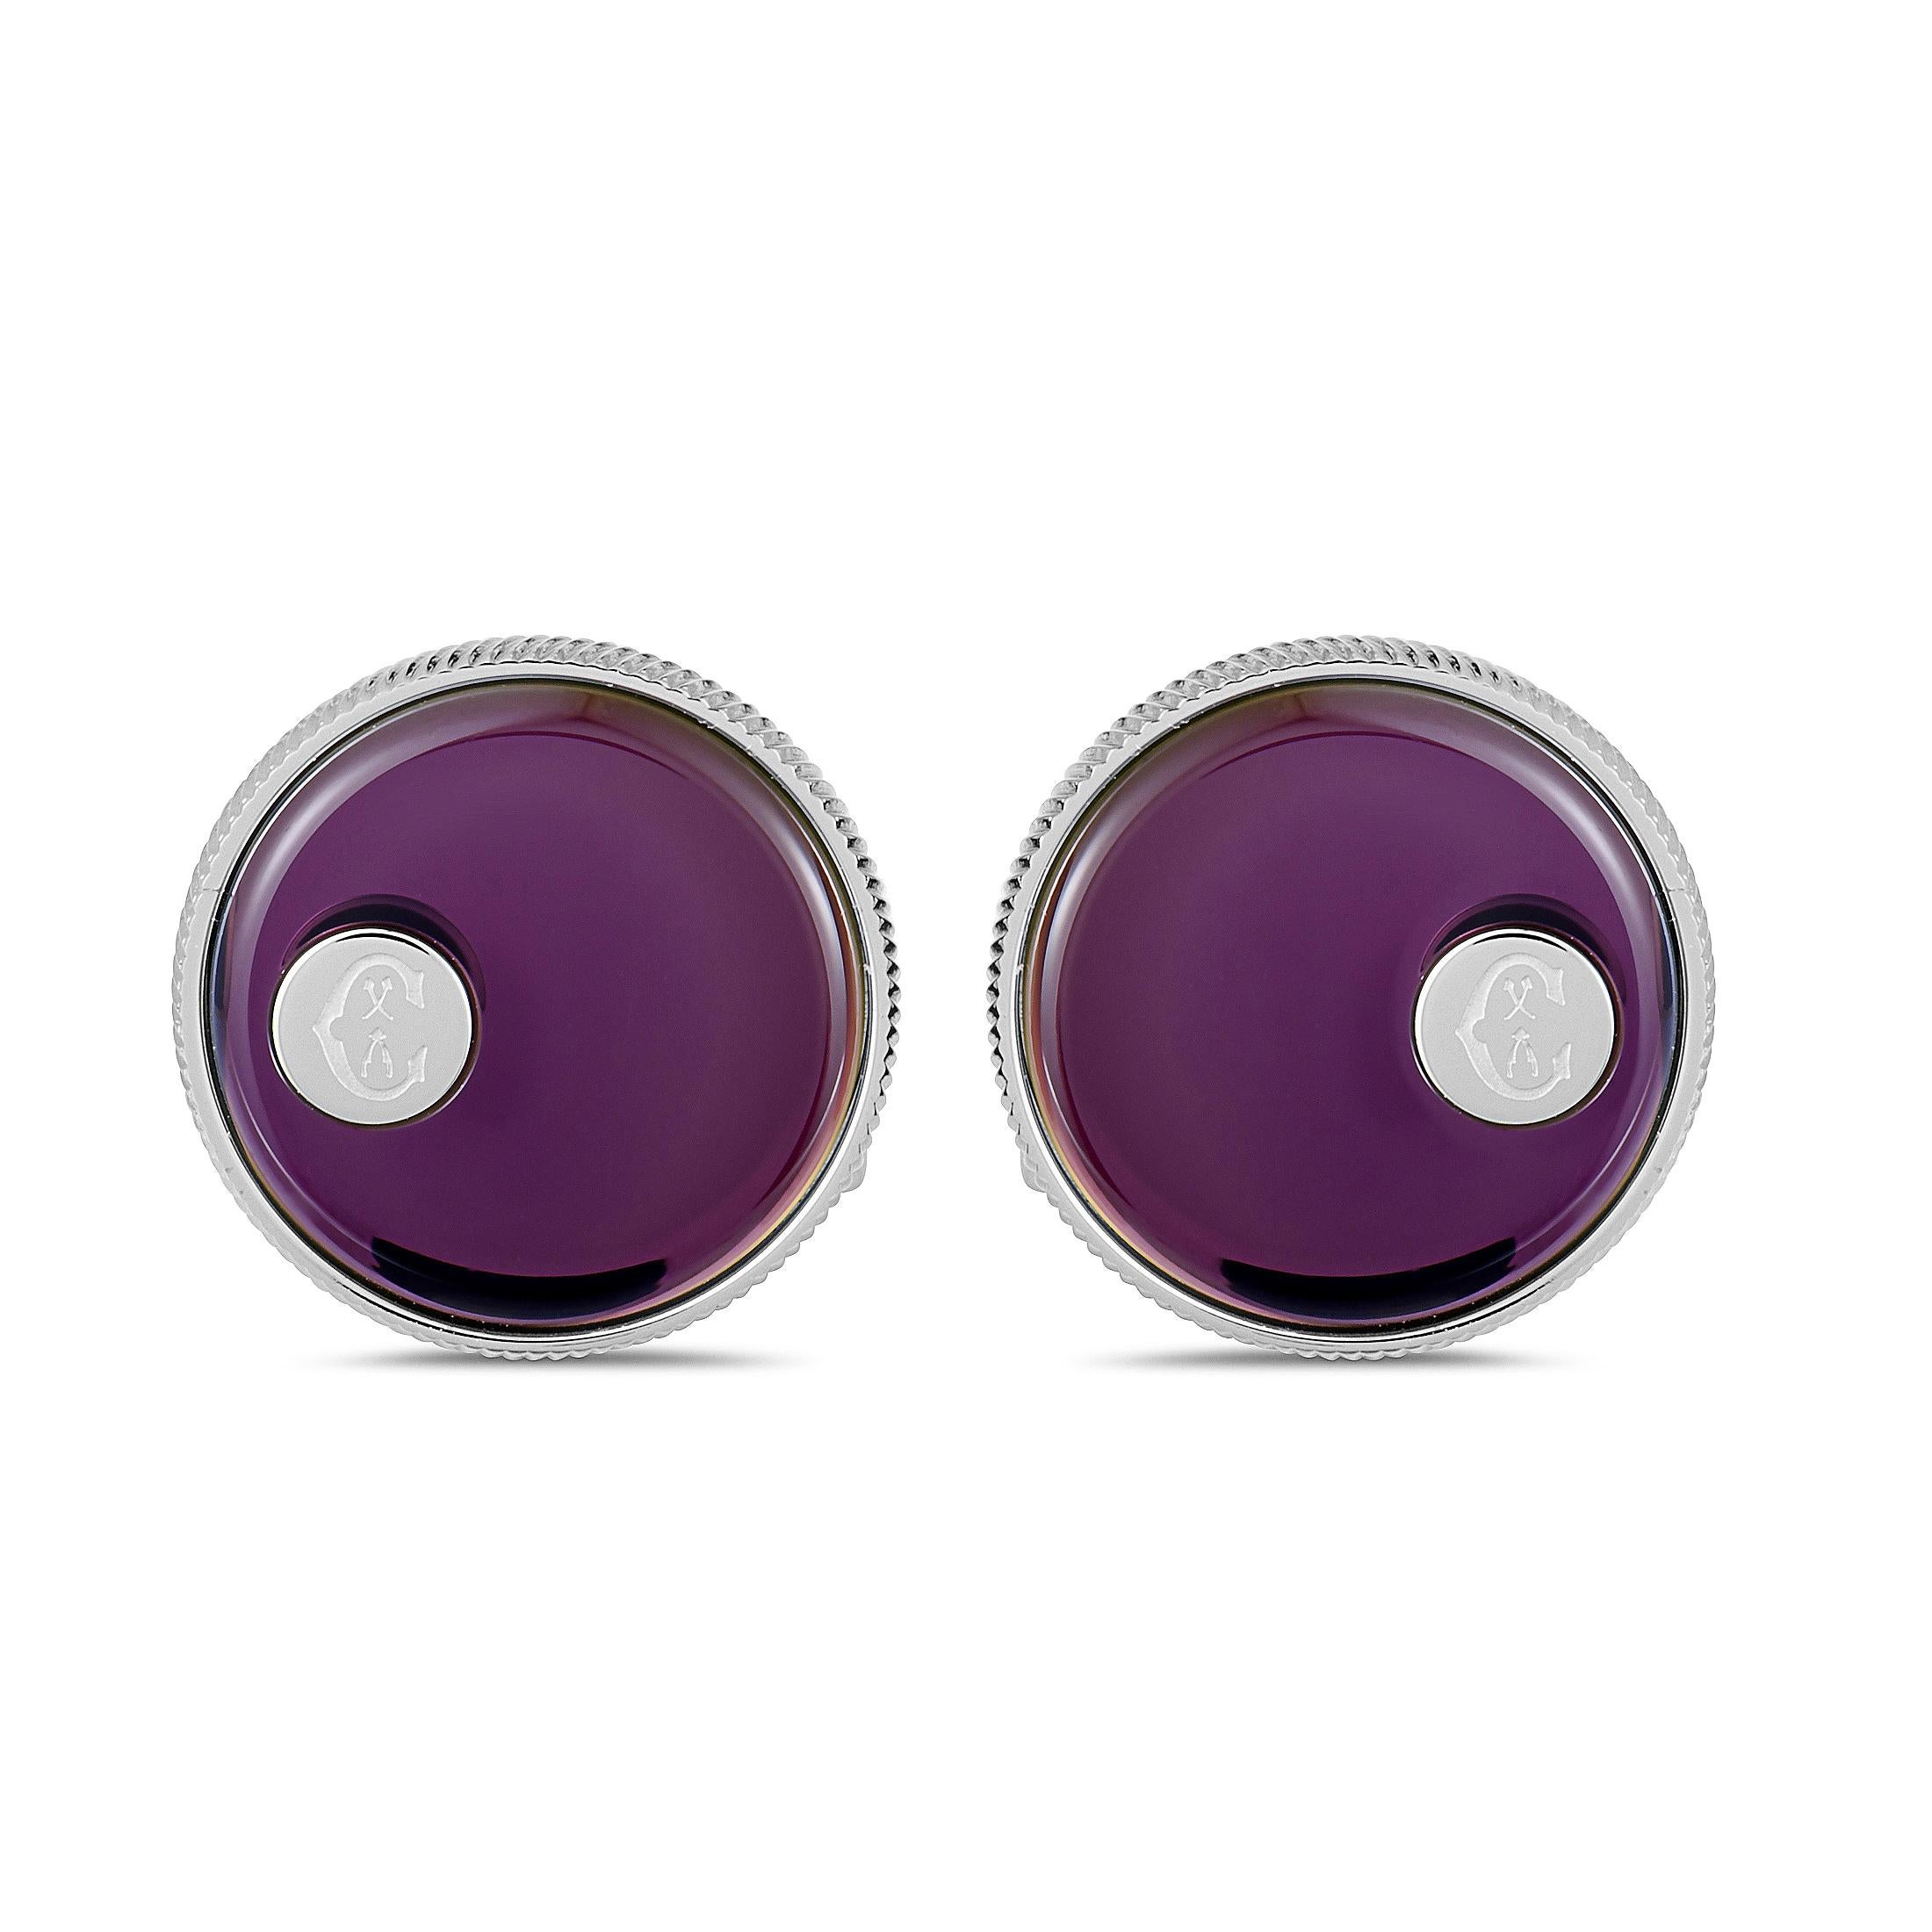 Polished to perfection and adorned with a magnificently regal shade of purple, the irresistibly attractive surface of these glorious cufflinks from Charriol produces exceptional play of light with its immaculately smooth and slightly concave shape